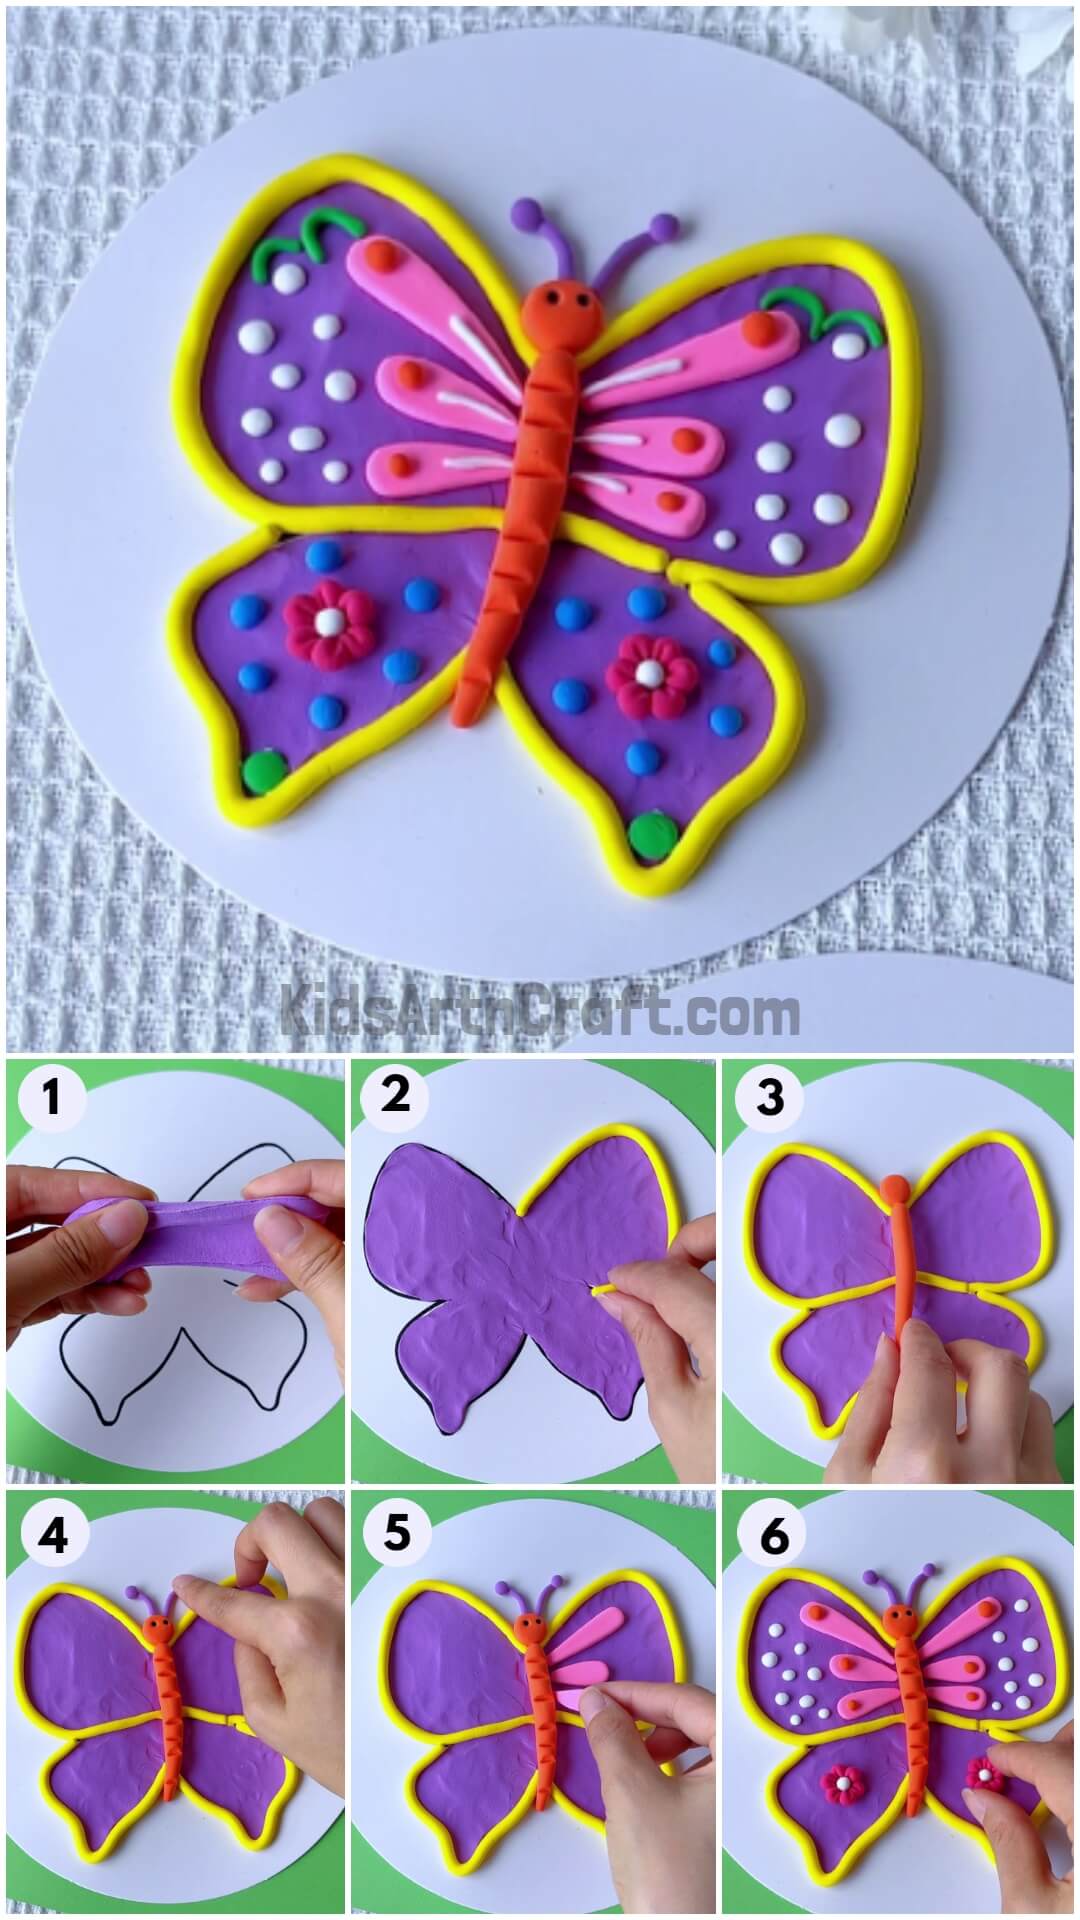 Learn to make butterfly Using clay for children